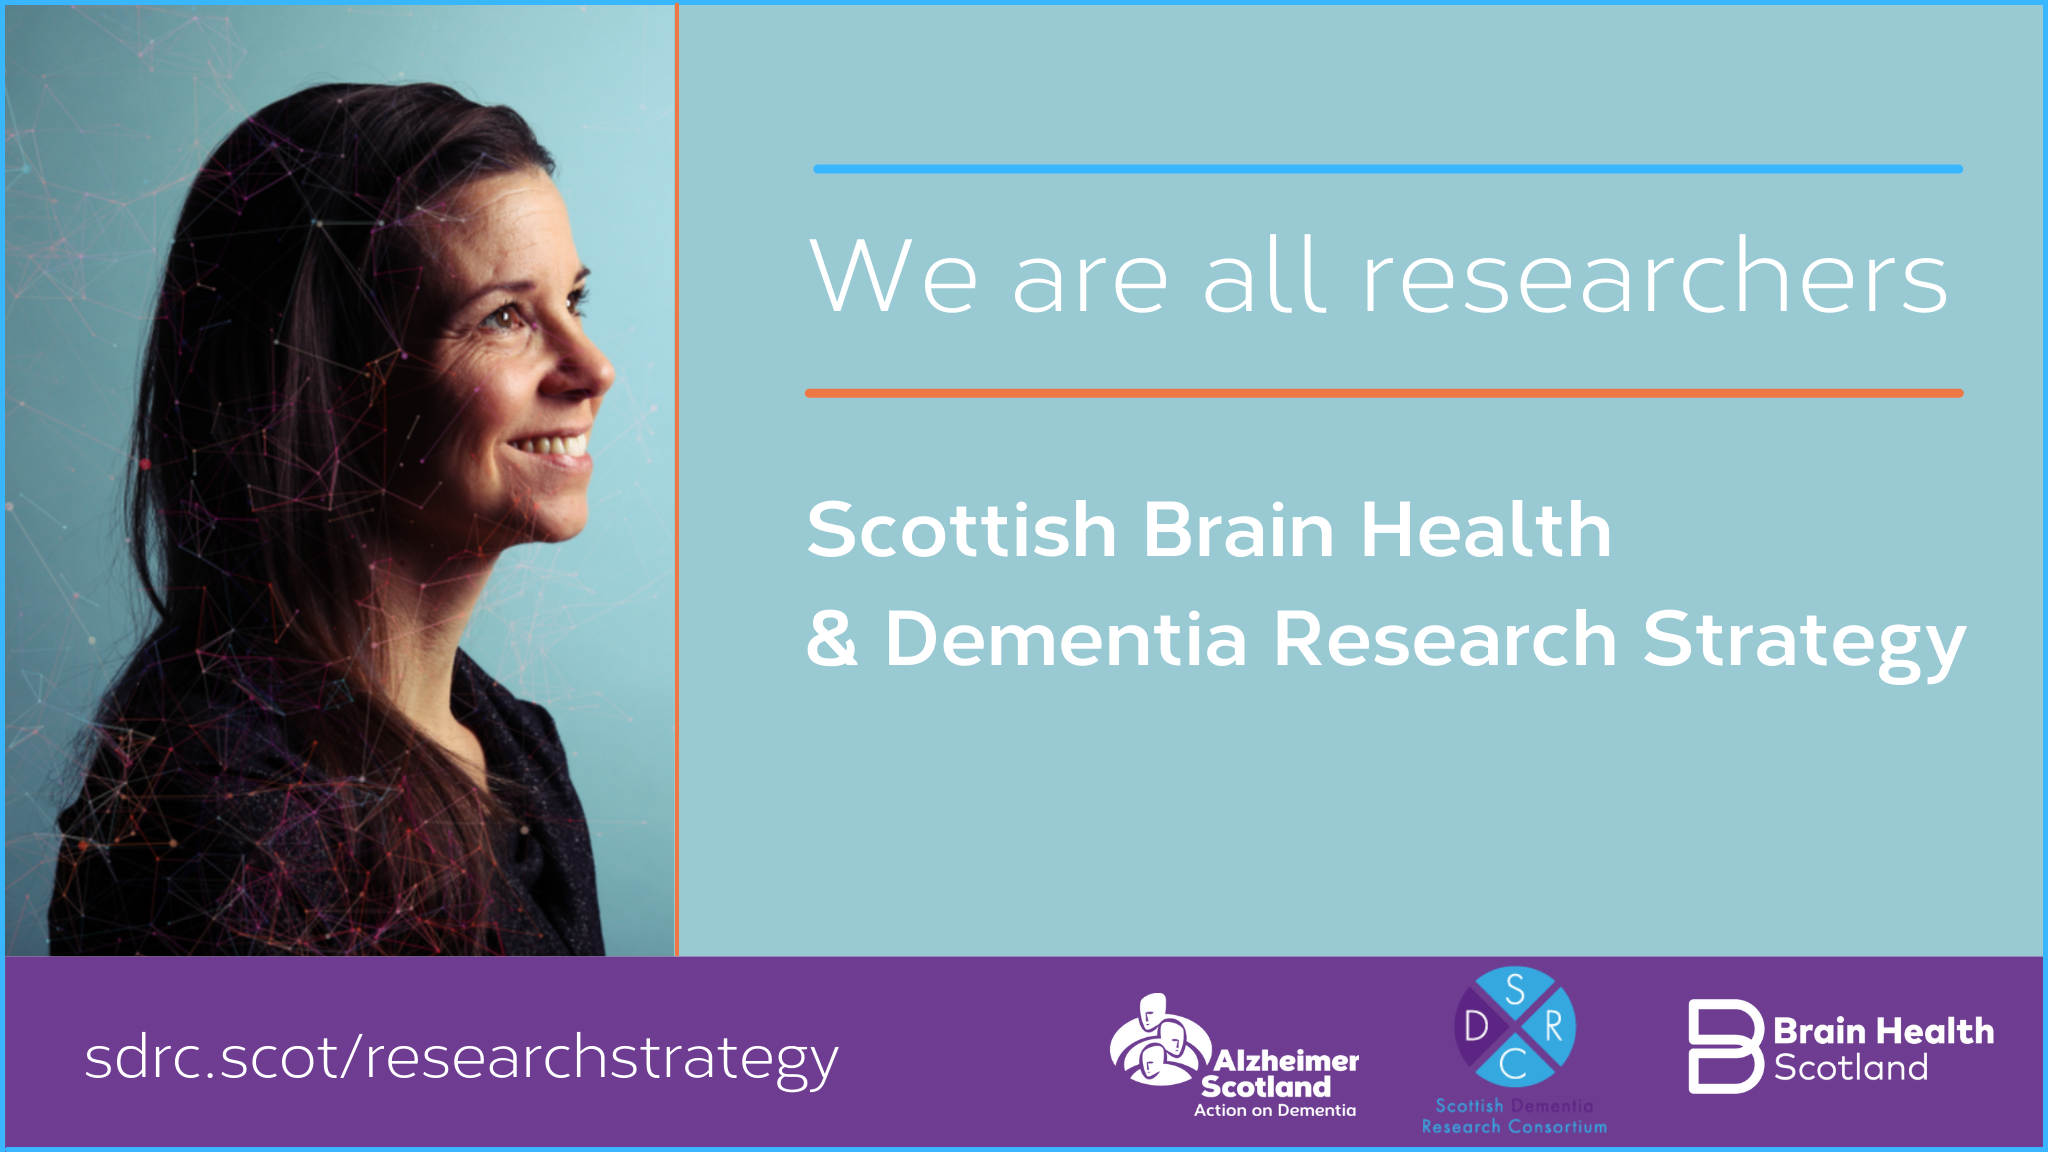 The Scottish Brain Health and Dementia Research Strategy